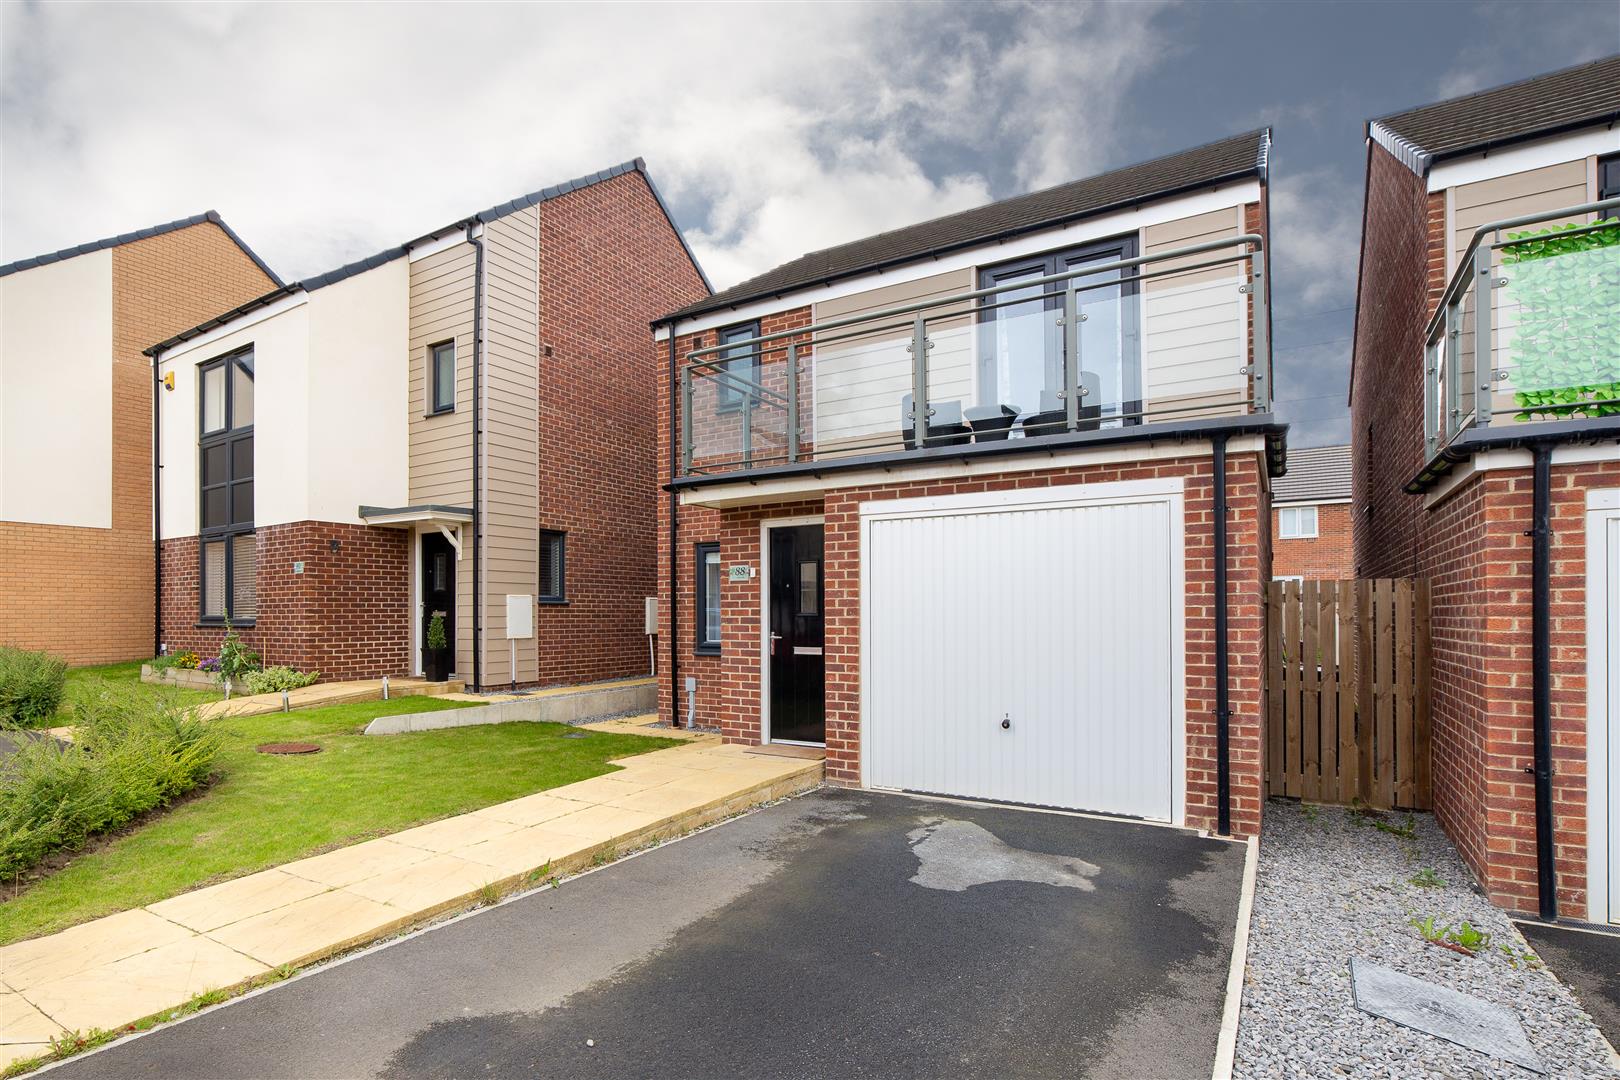 3 bed detached house for sale in Osprey Walk, Newcastle Upon Tyne - Property Image 1